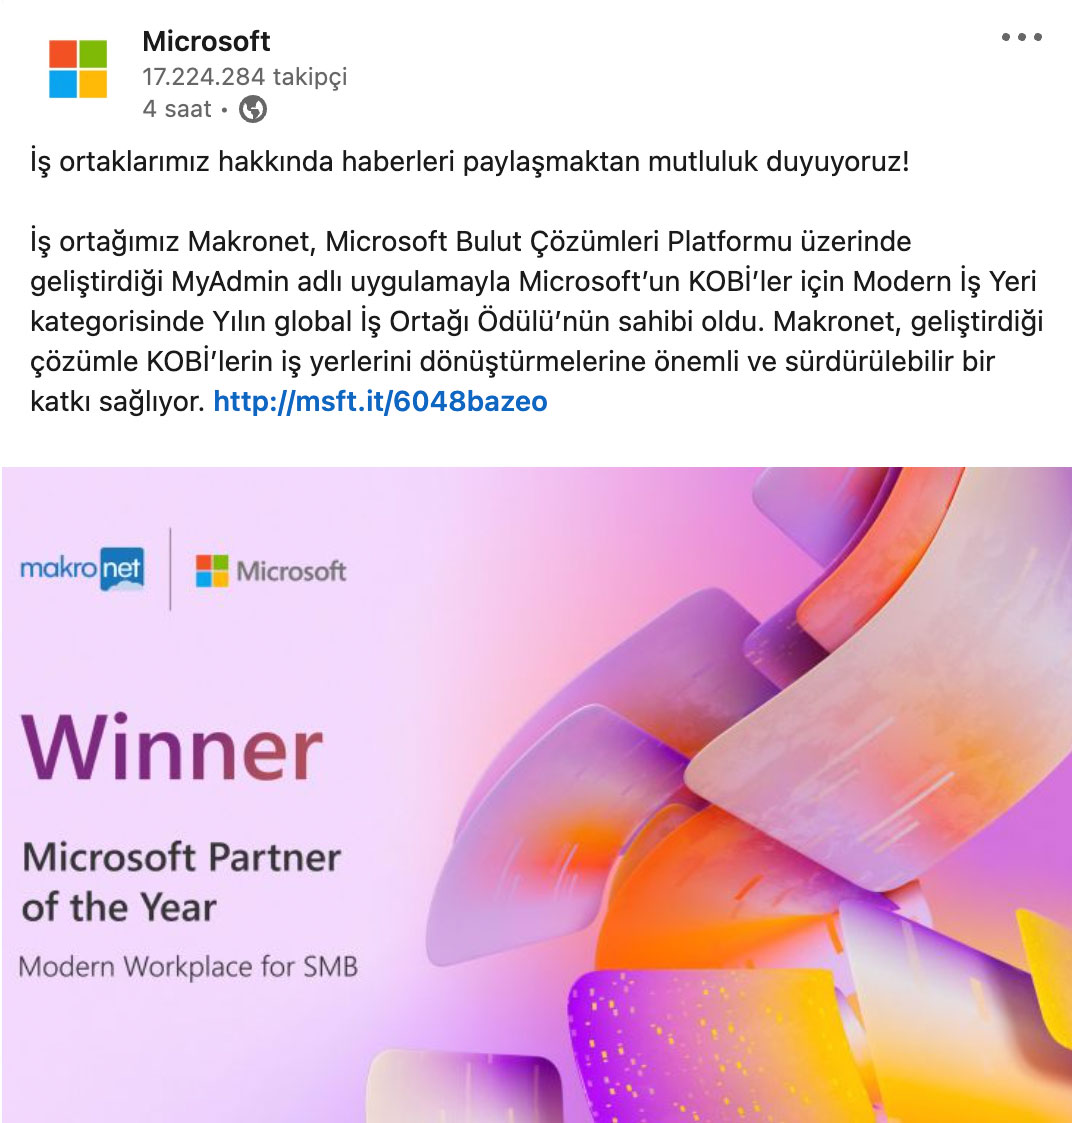 Microsoft Partner of the Year Model Workplace for SMB